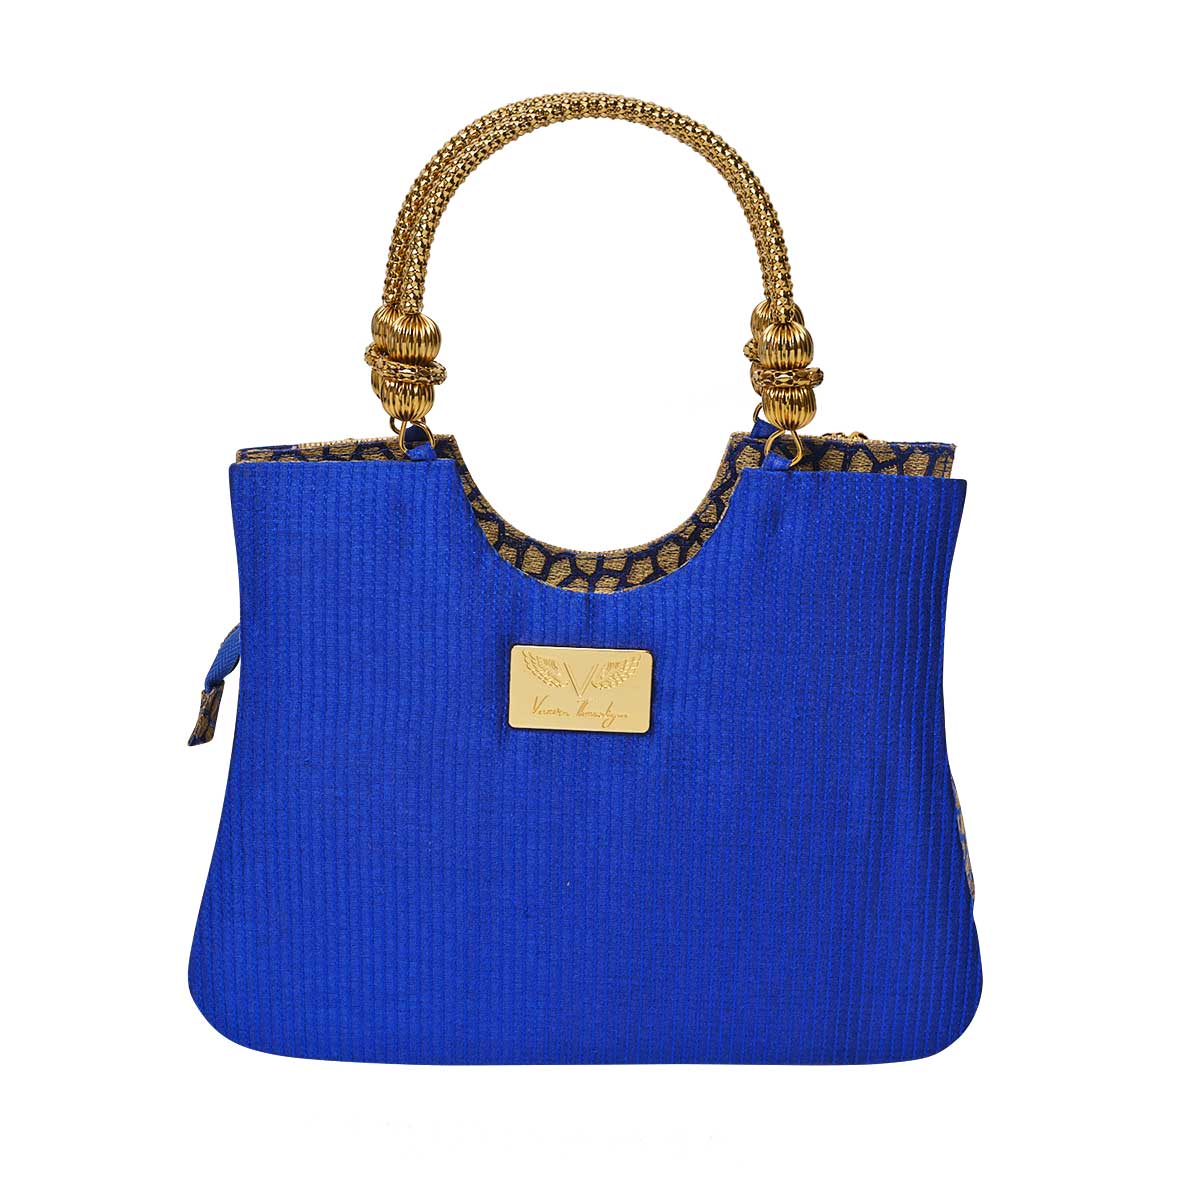 Suriya Mini tote blue and gold with ornate handles. As seen on ramp at NYFW 2021 and editorials. Back view with logo plaque